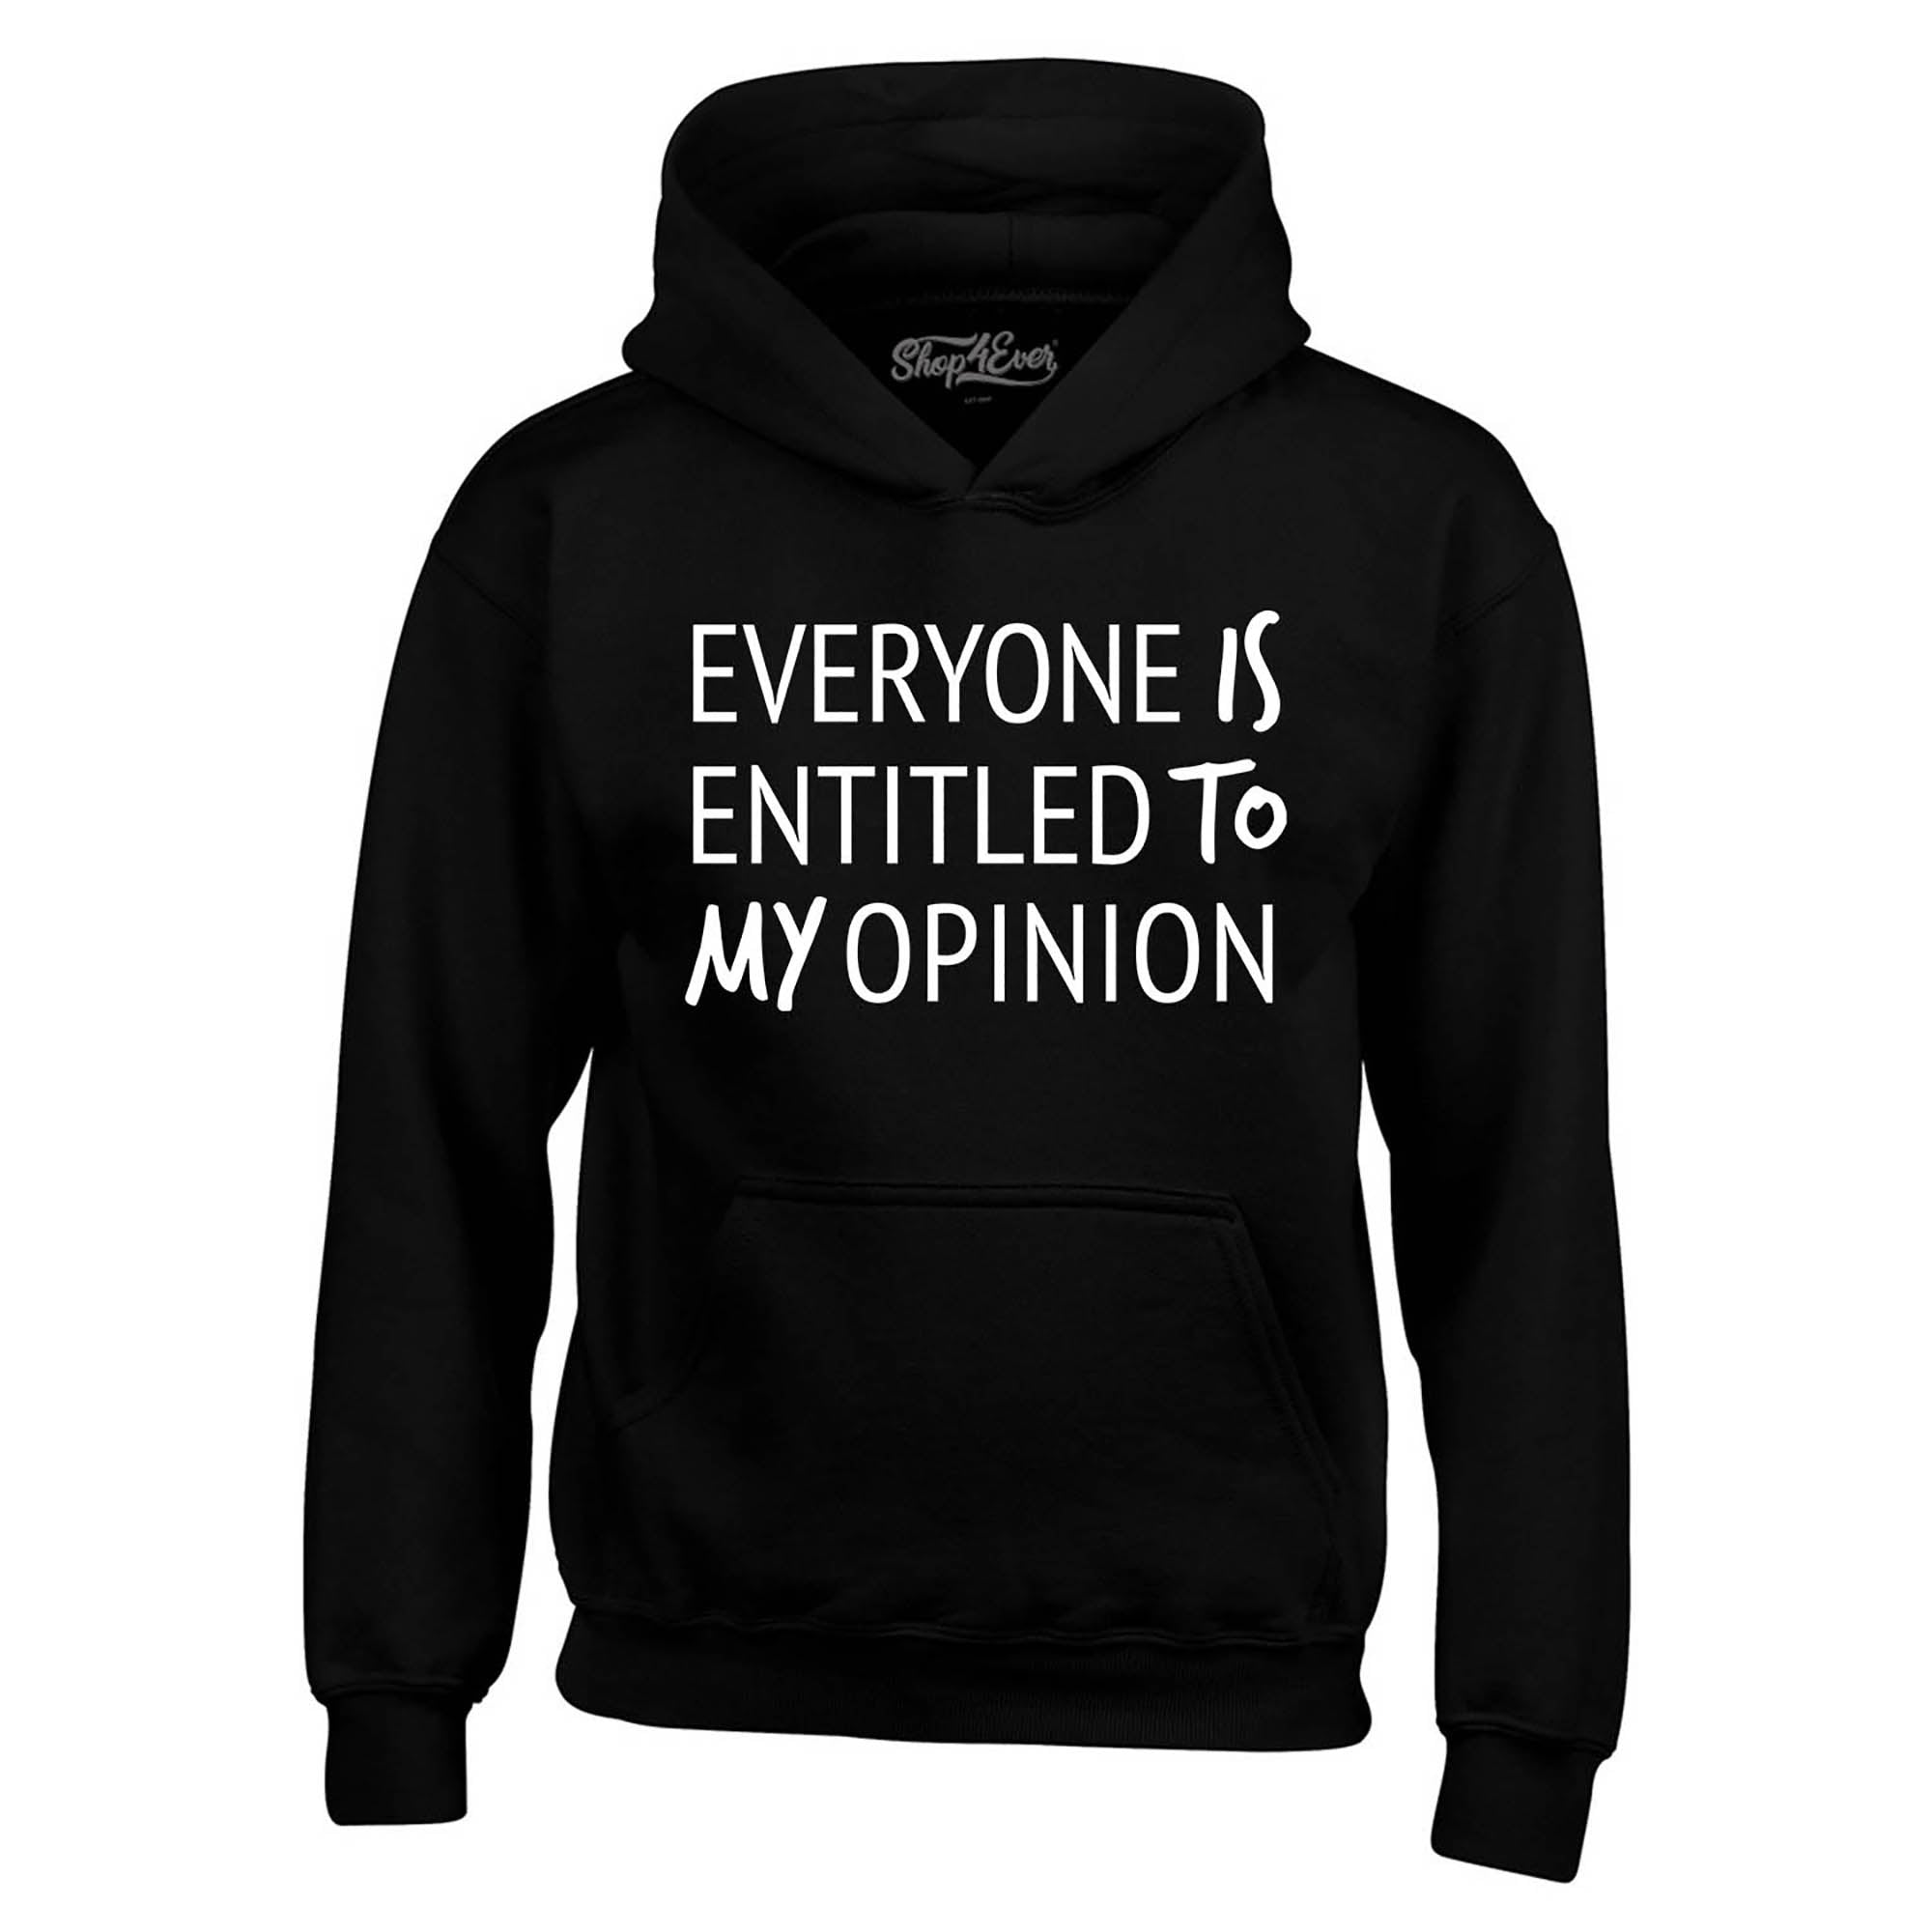 Everyone is Entitled to My Opinion Funny Sarcastic Hoodie Sweatshirts